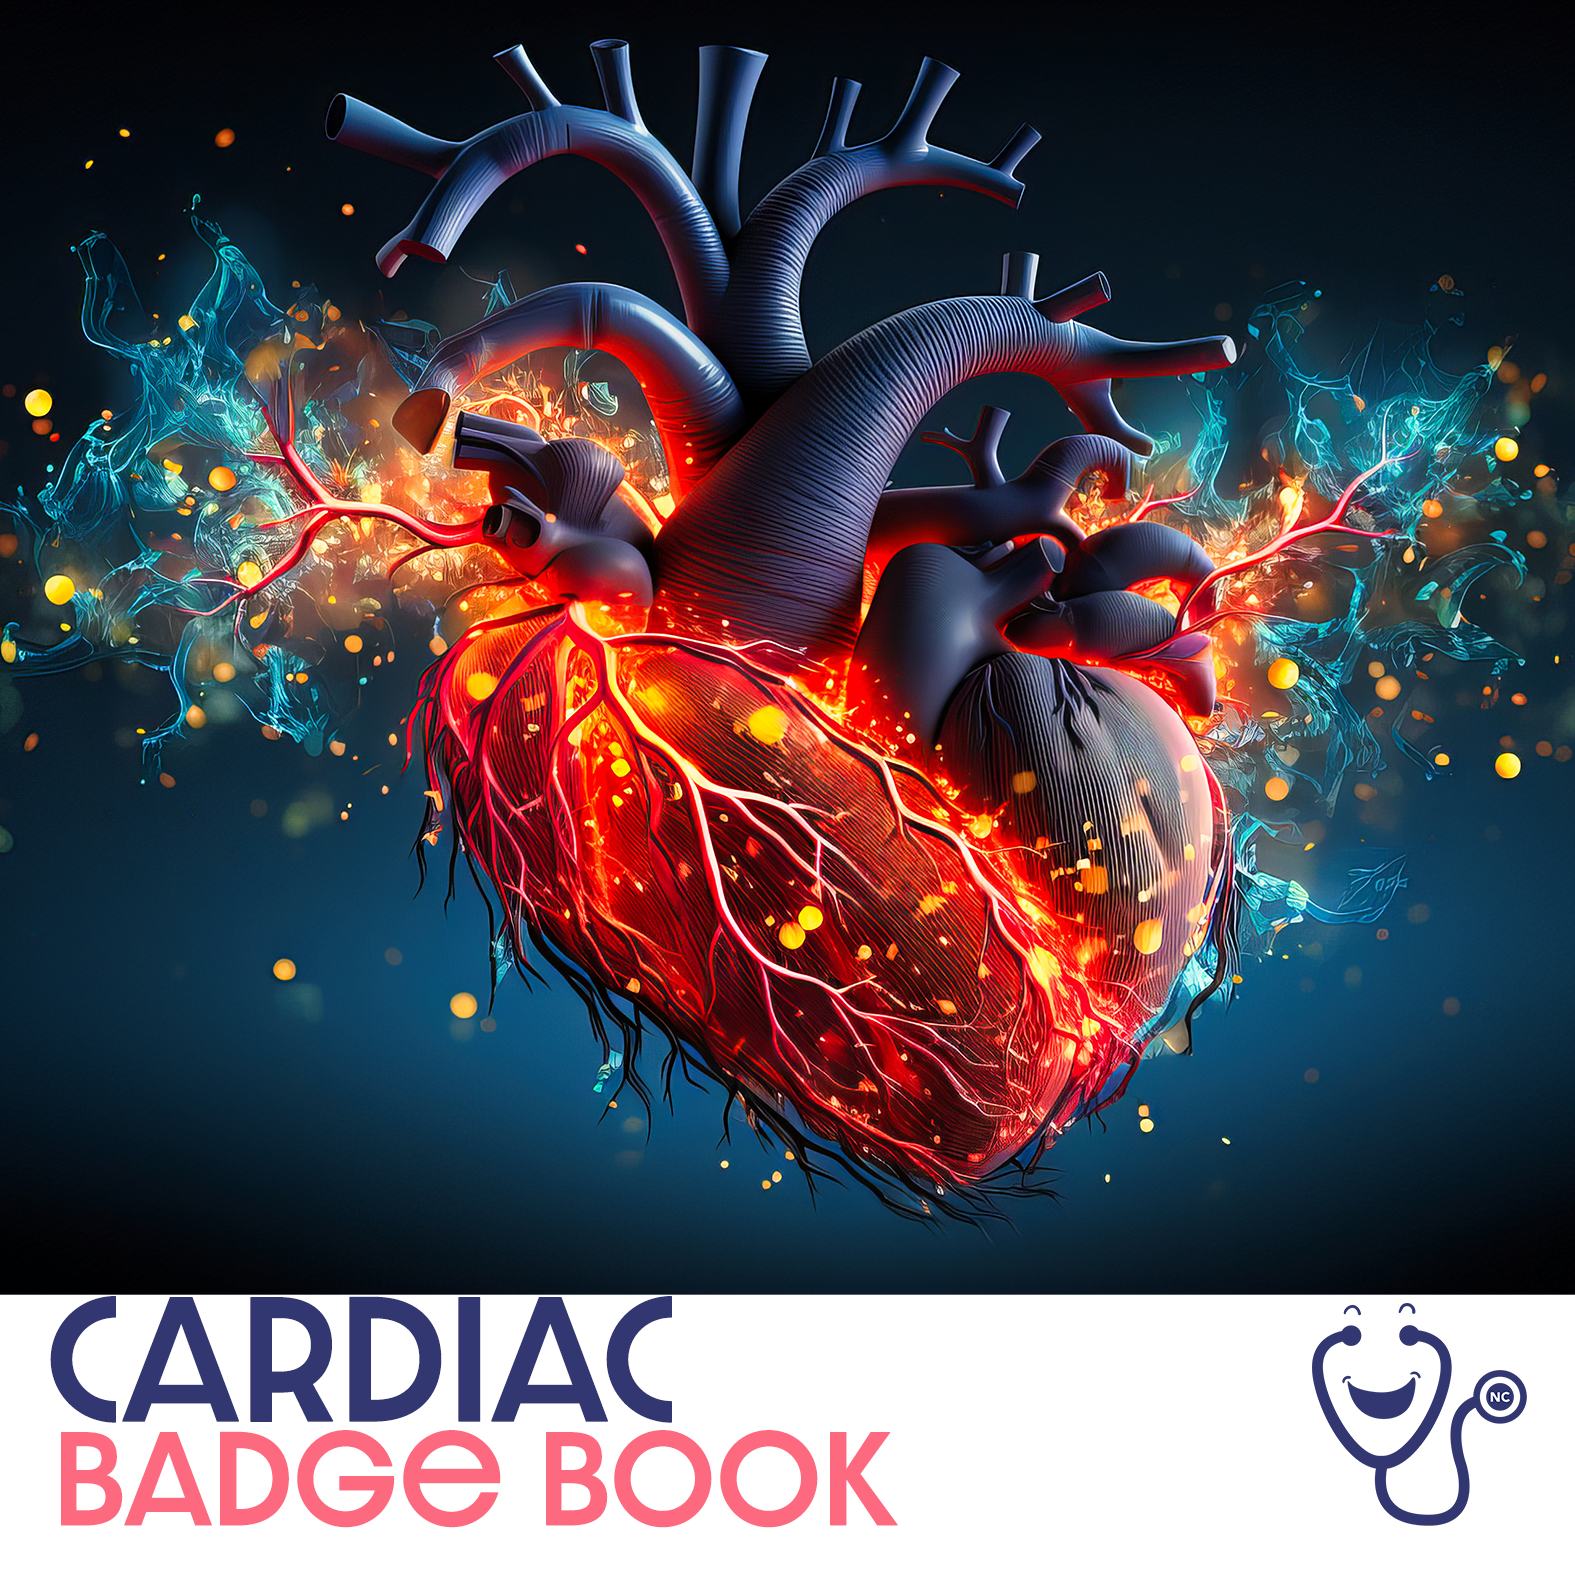 The standard edition of our cardiac badge book contains EKG tips, EKG Rhythms, Bradycardia, Tachycardia, MI, Levophed, and Cardiac Drips. (Our drips section has been confirmed by a board-certified Pharmacist.). This will ship on April 5, 2024.